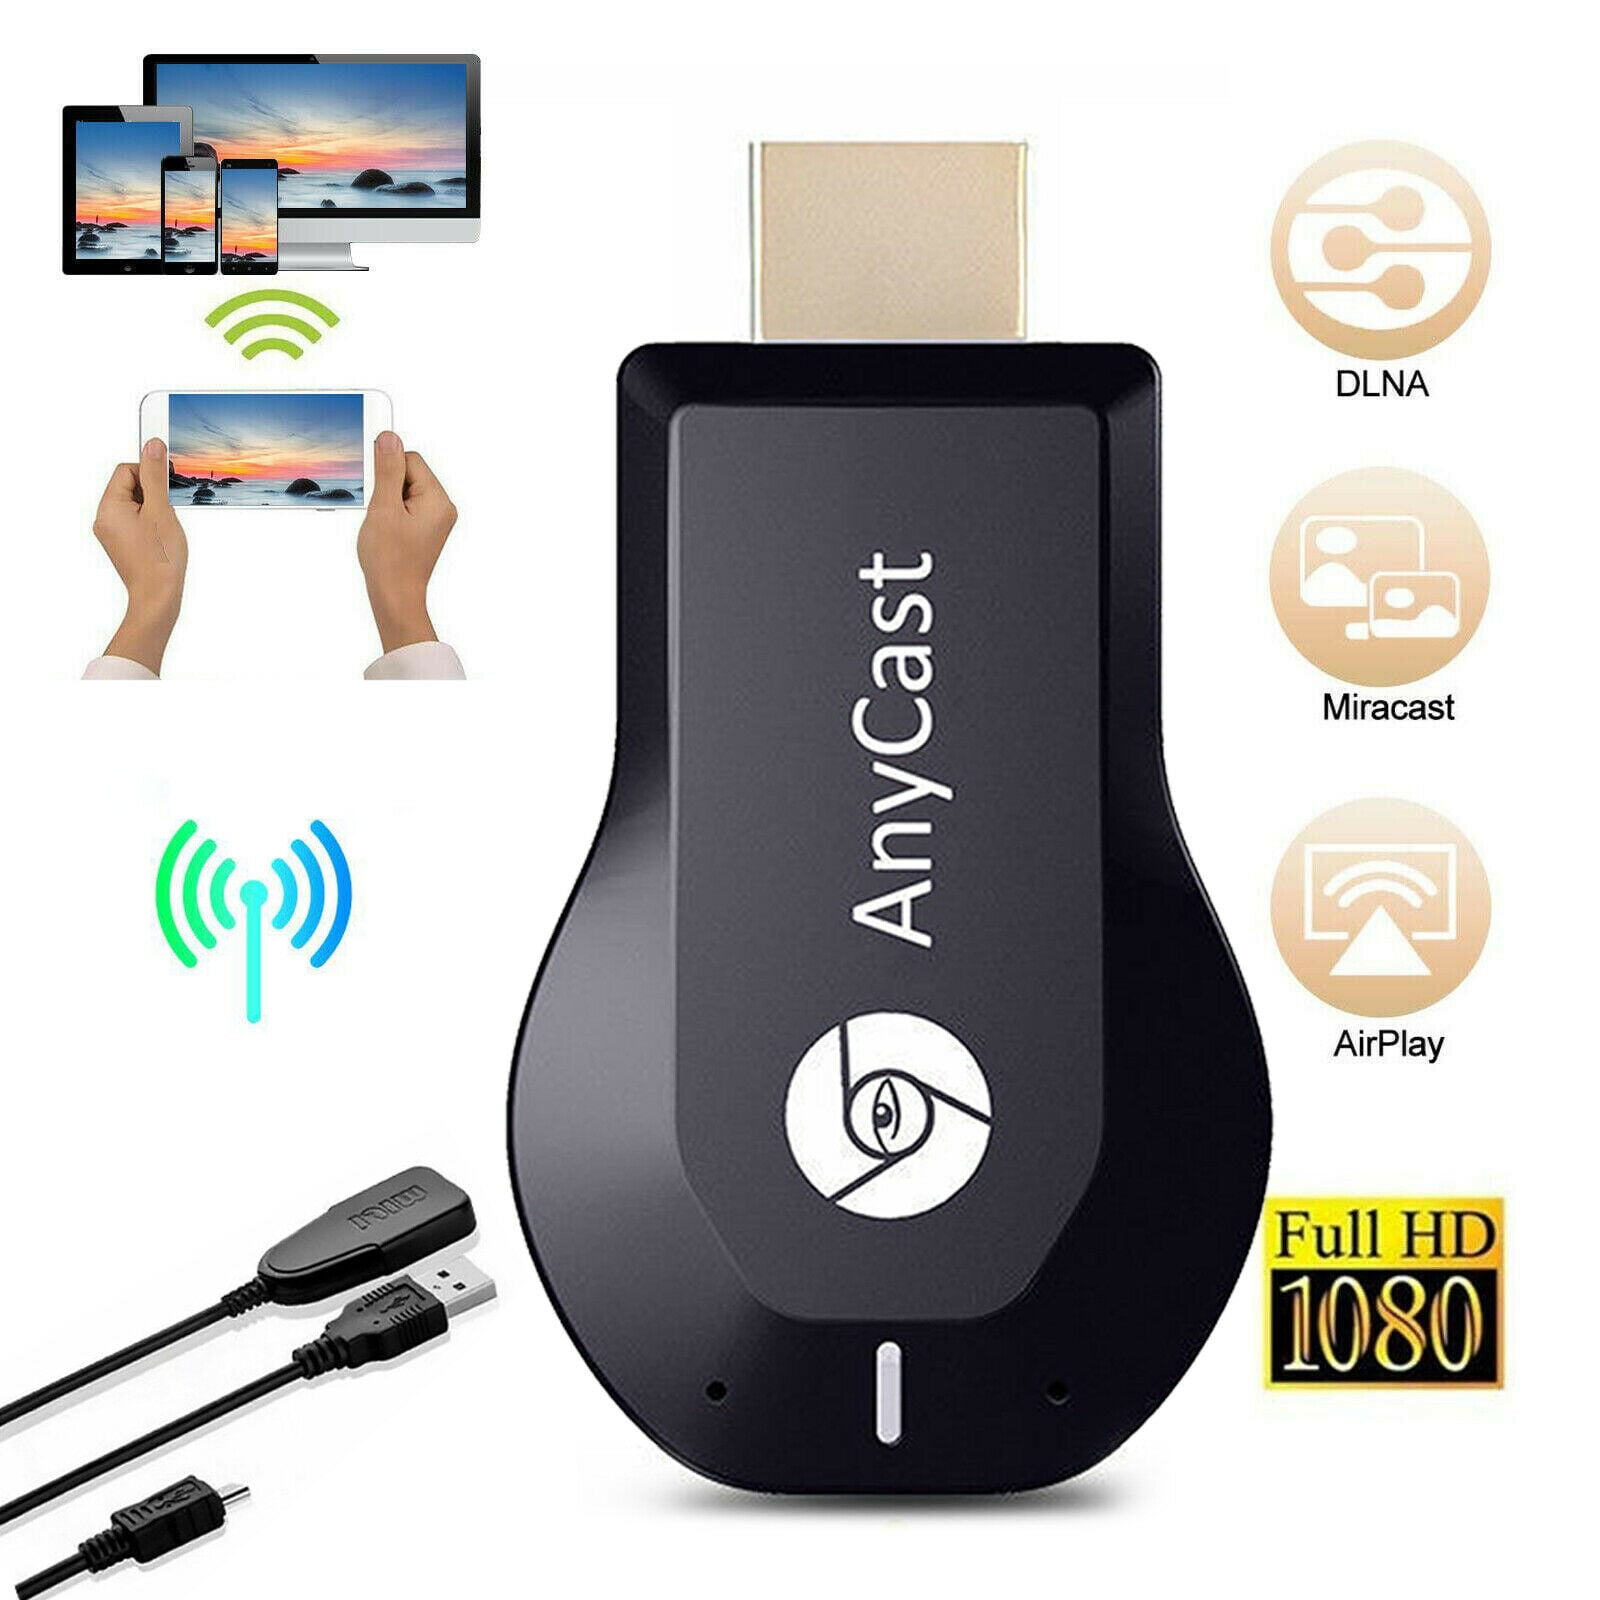 4K&1080P Wireless HDMI Display Adapter,iPhone Ipad Miracast Dongle for TV,Upgraded Toneseas Streaming Receiver,MacBook Laptop Samsung LG Android Phone,Business Education Office Birthday Gift 